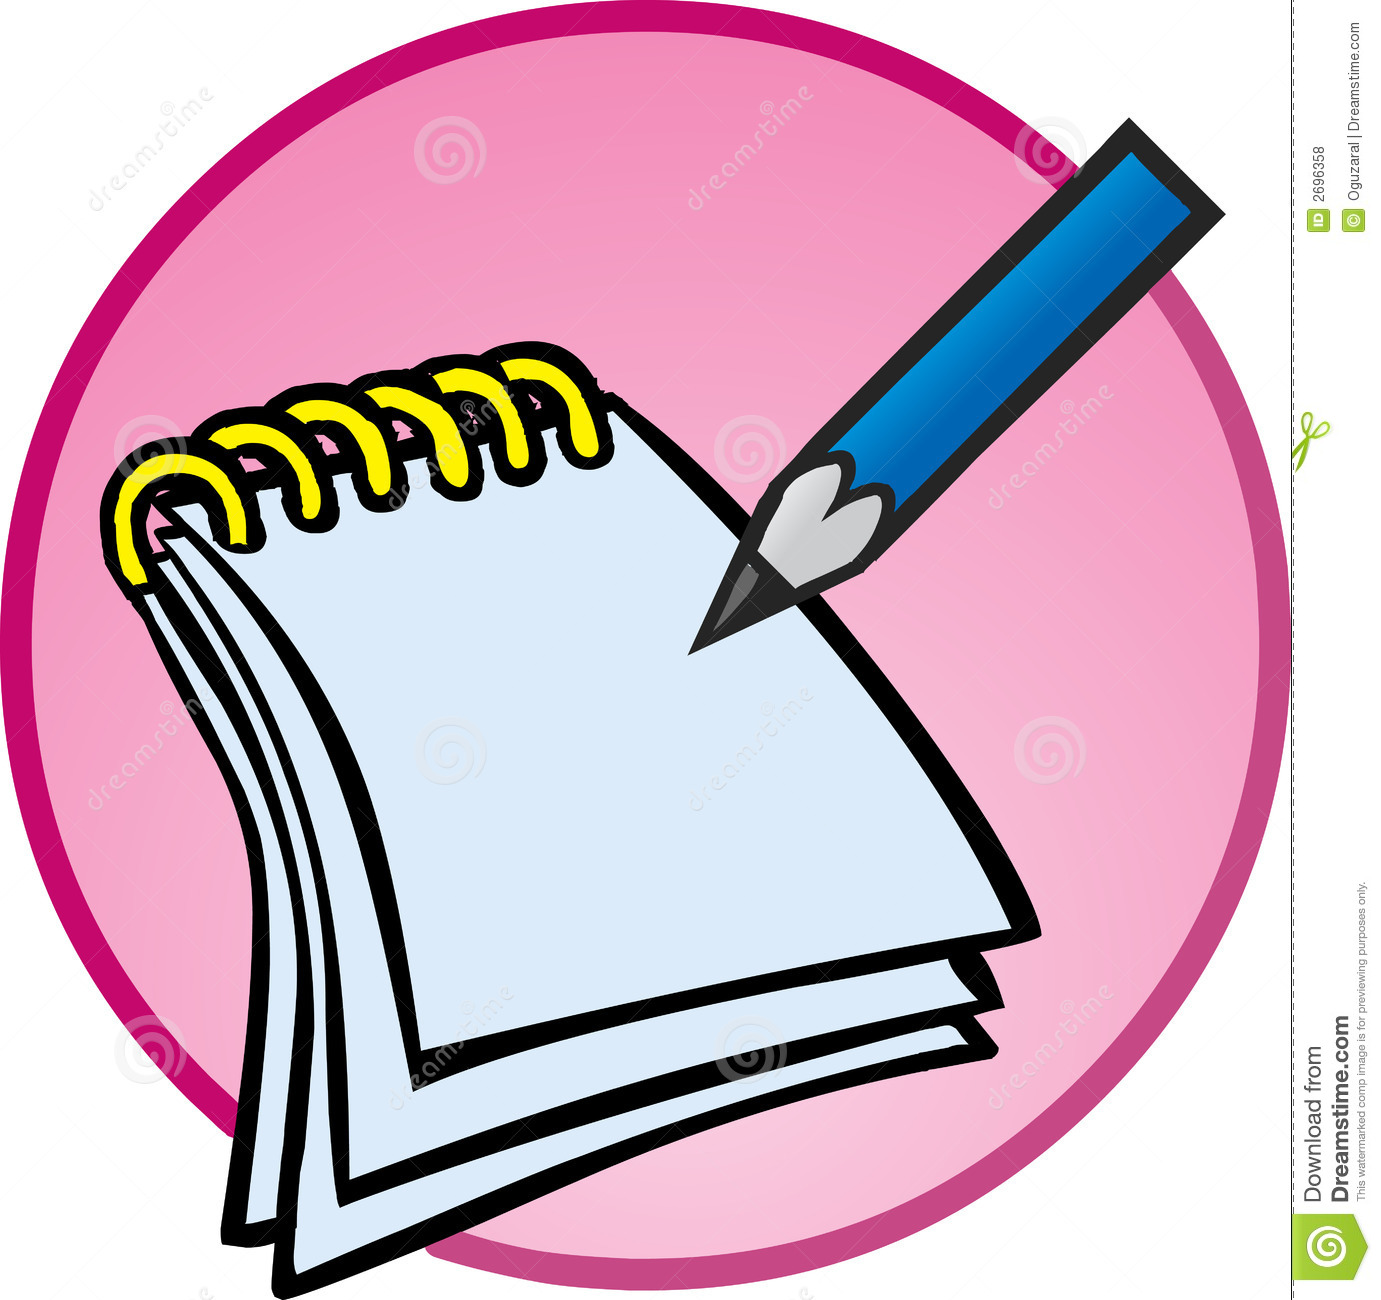 Notepad Clipart